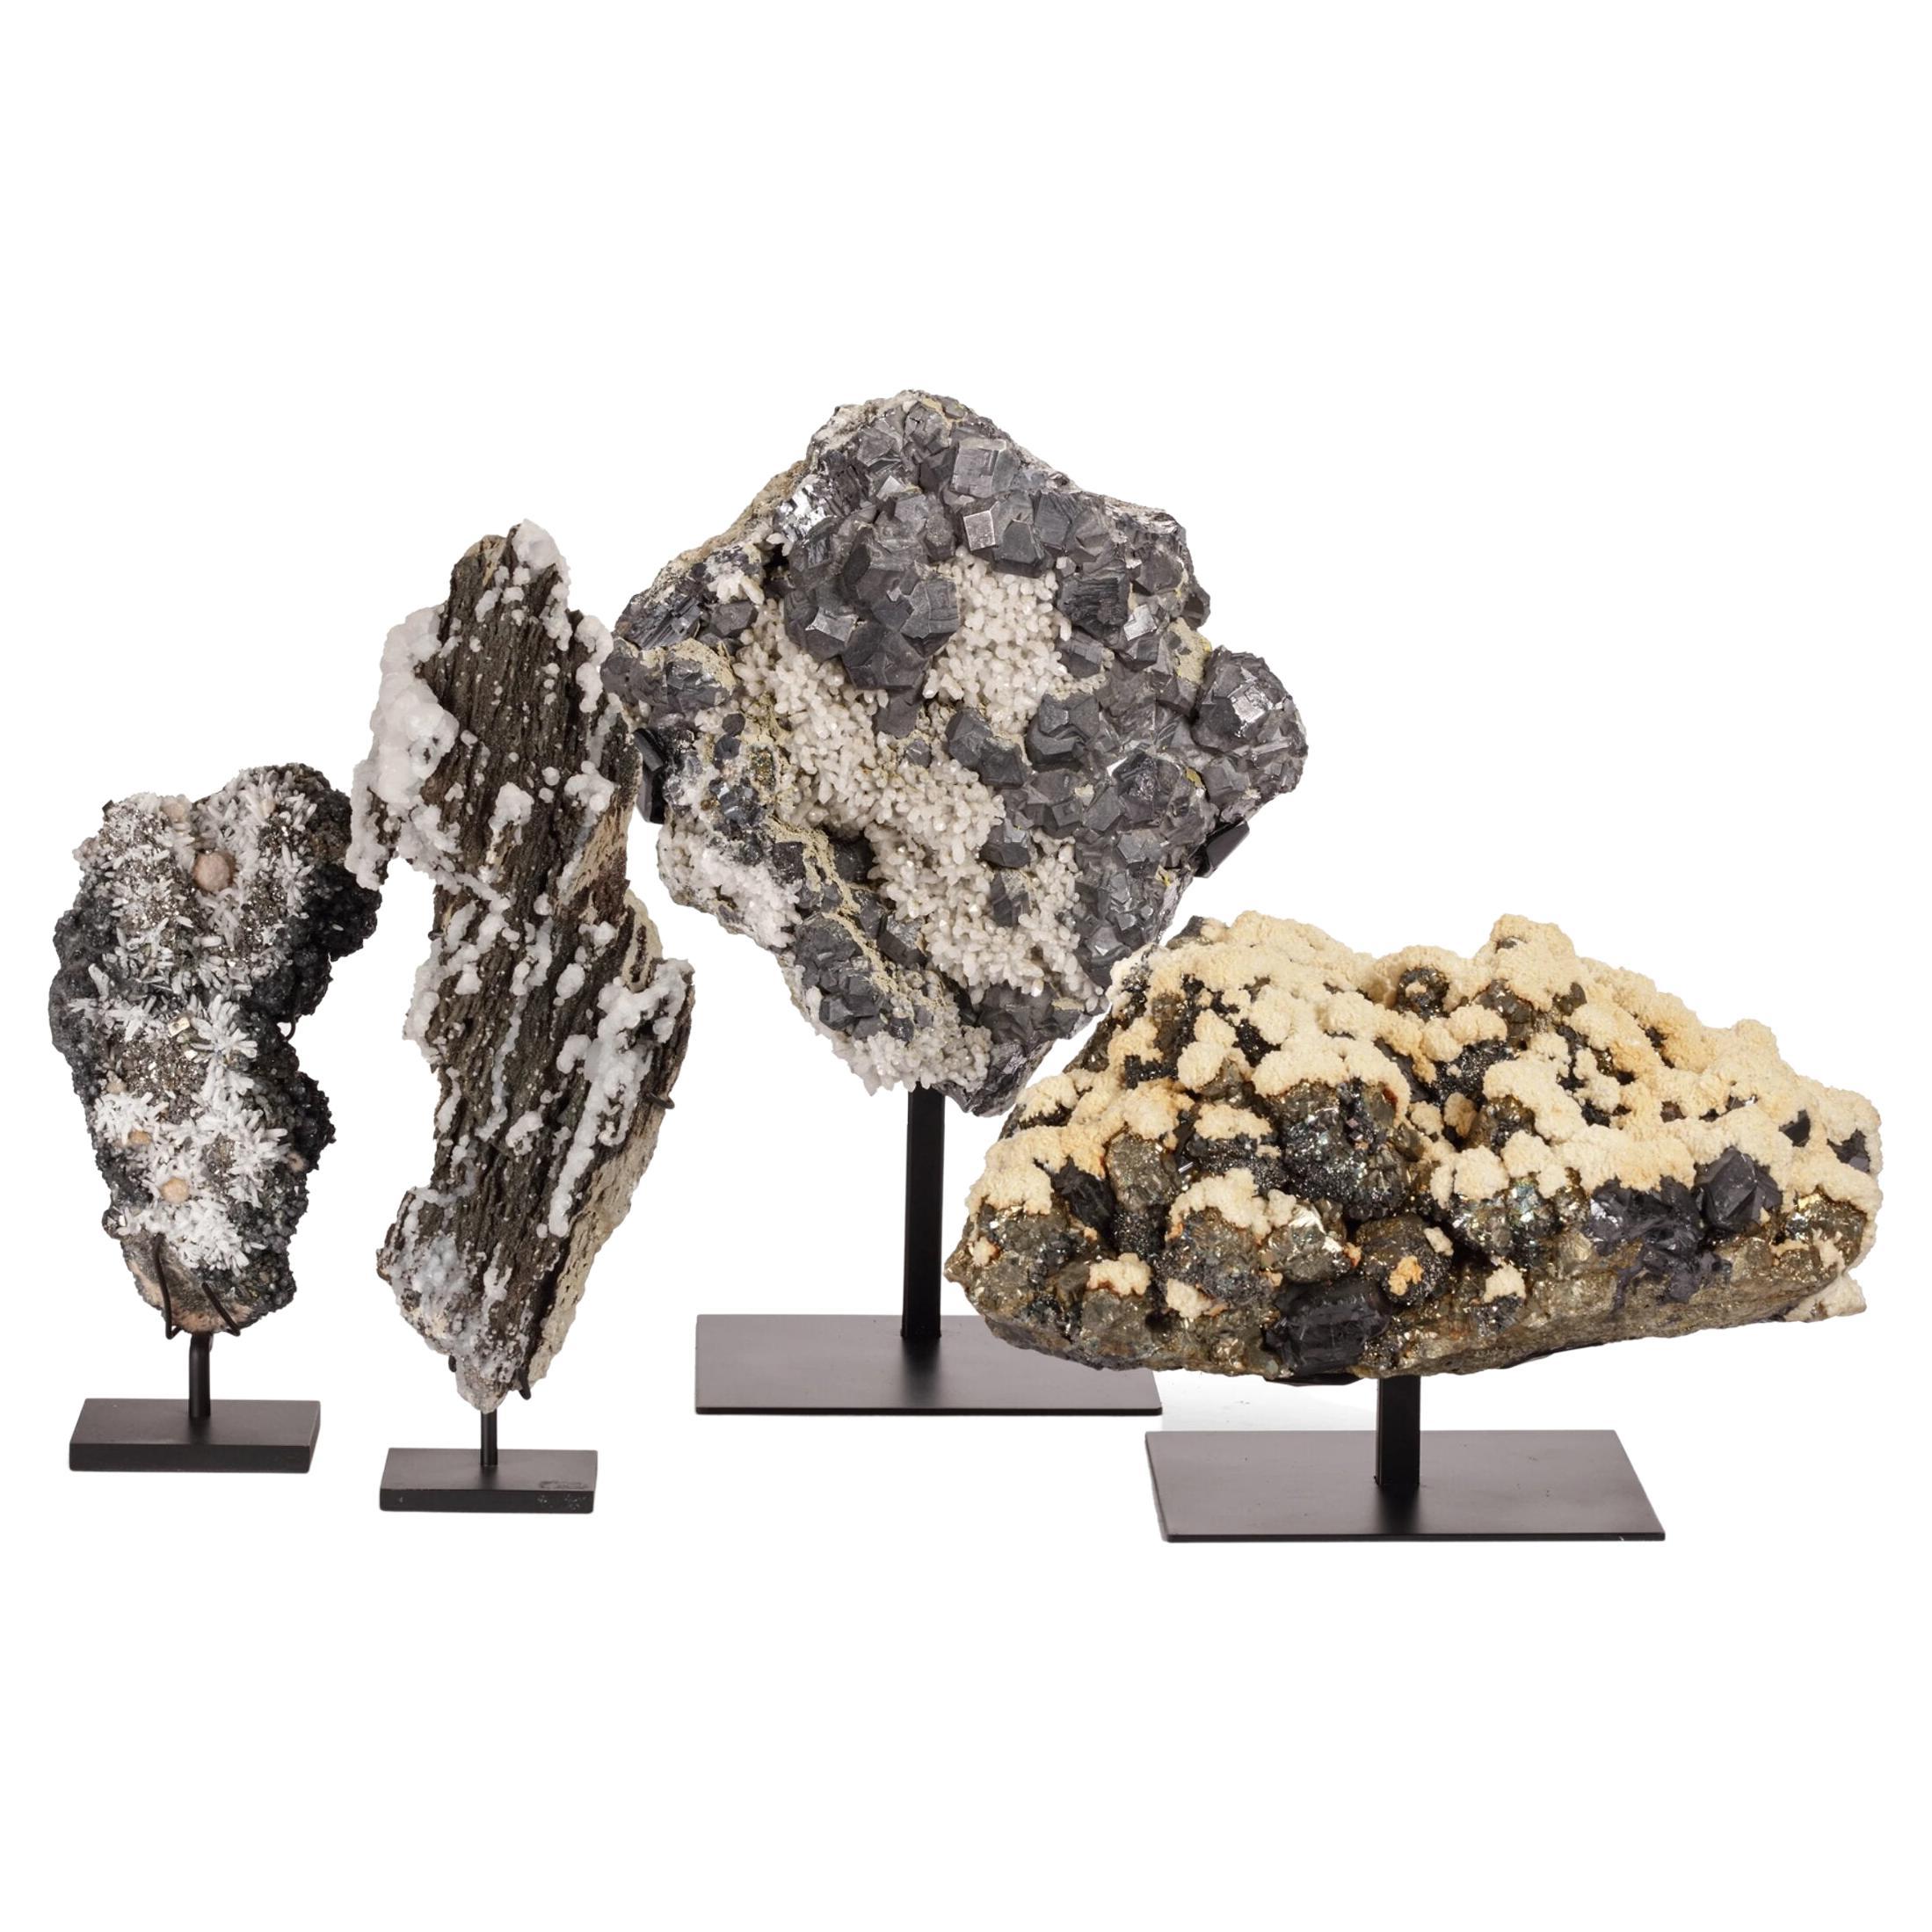 Collection of Splendid Mineral Specimens Naturally Formed as Snowy Mountains